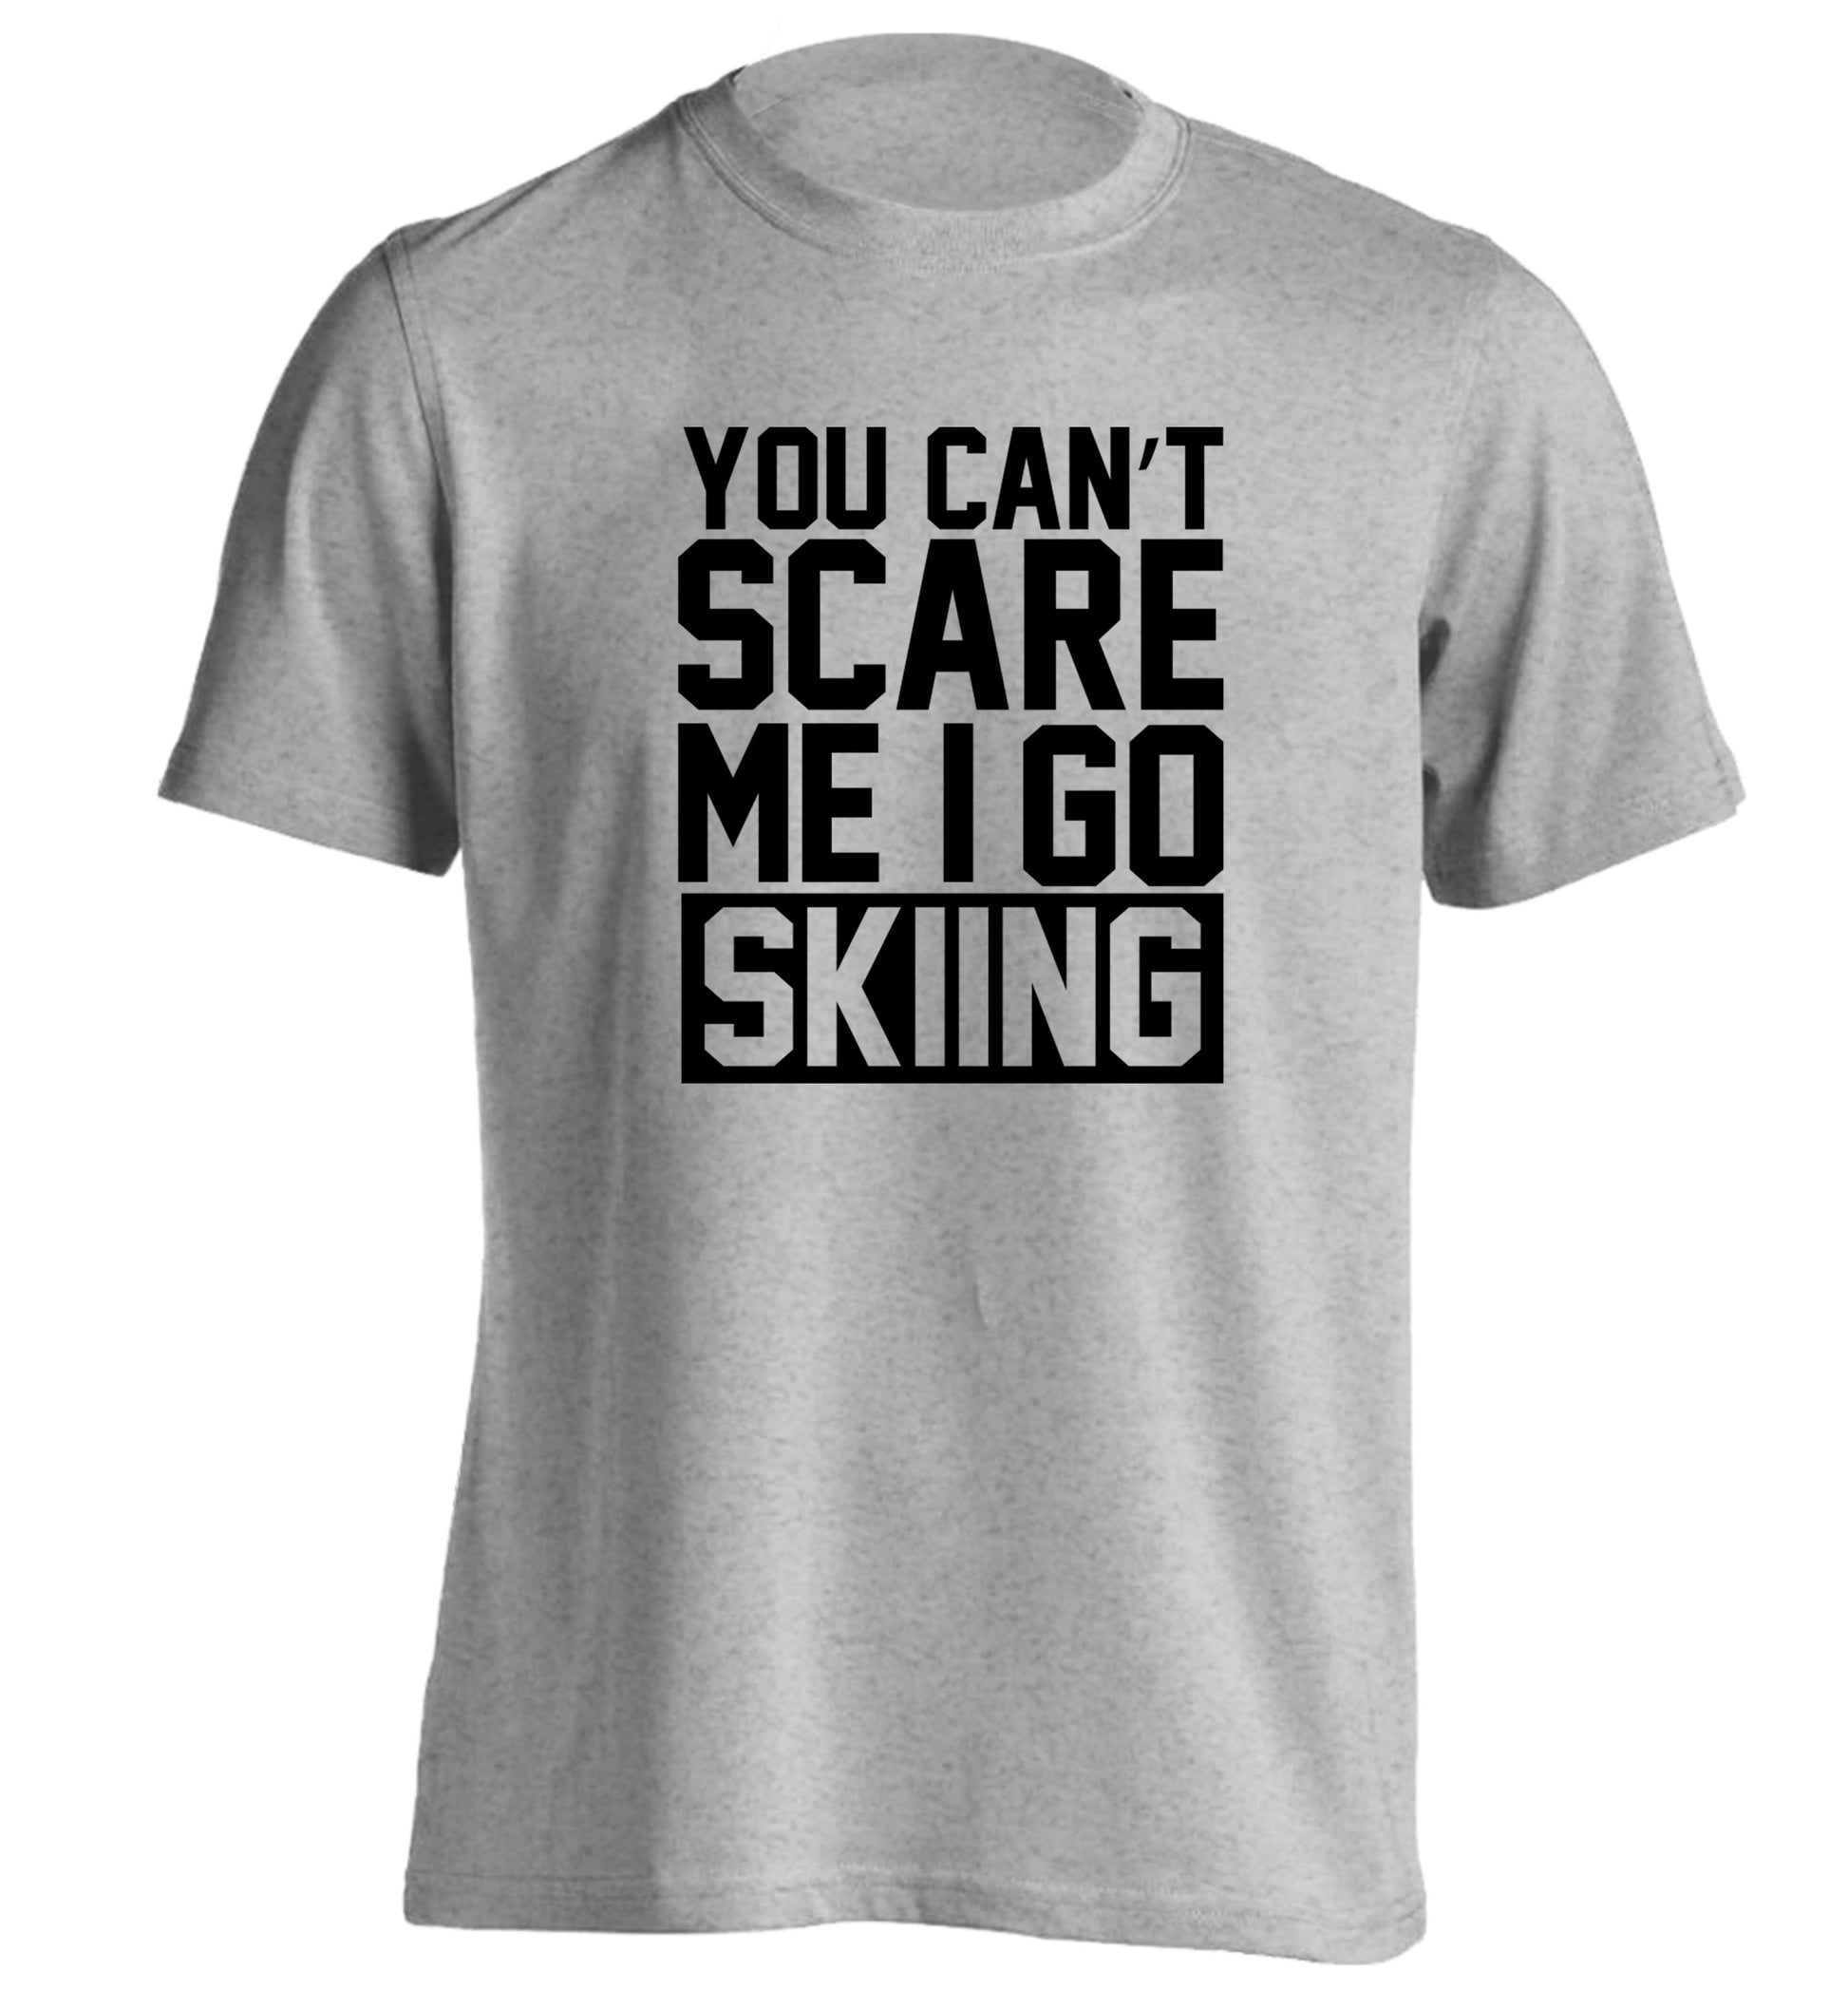 You can't scare me I go skiing adults unisex grey Tshirt 2XL